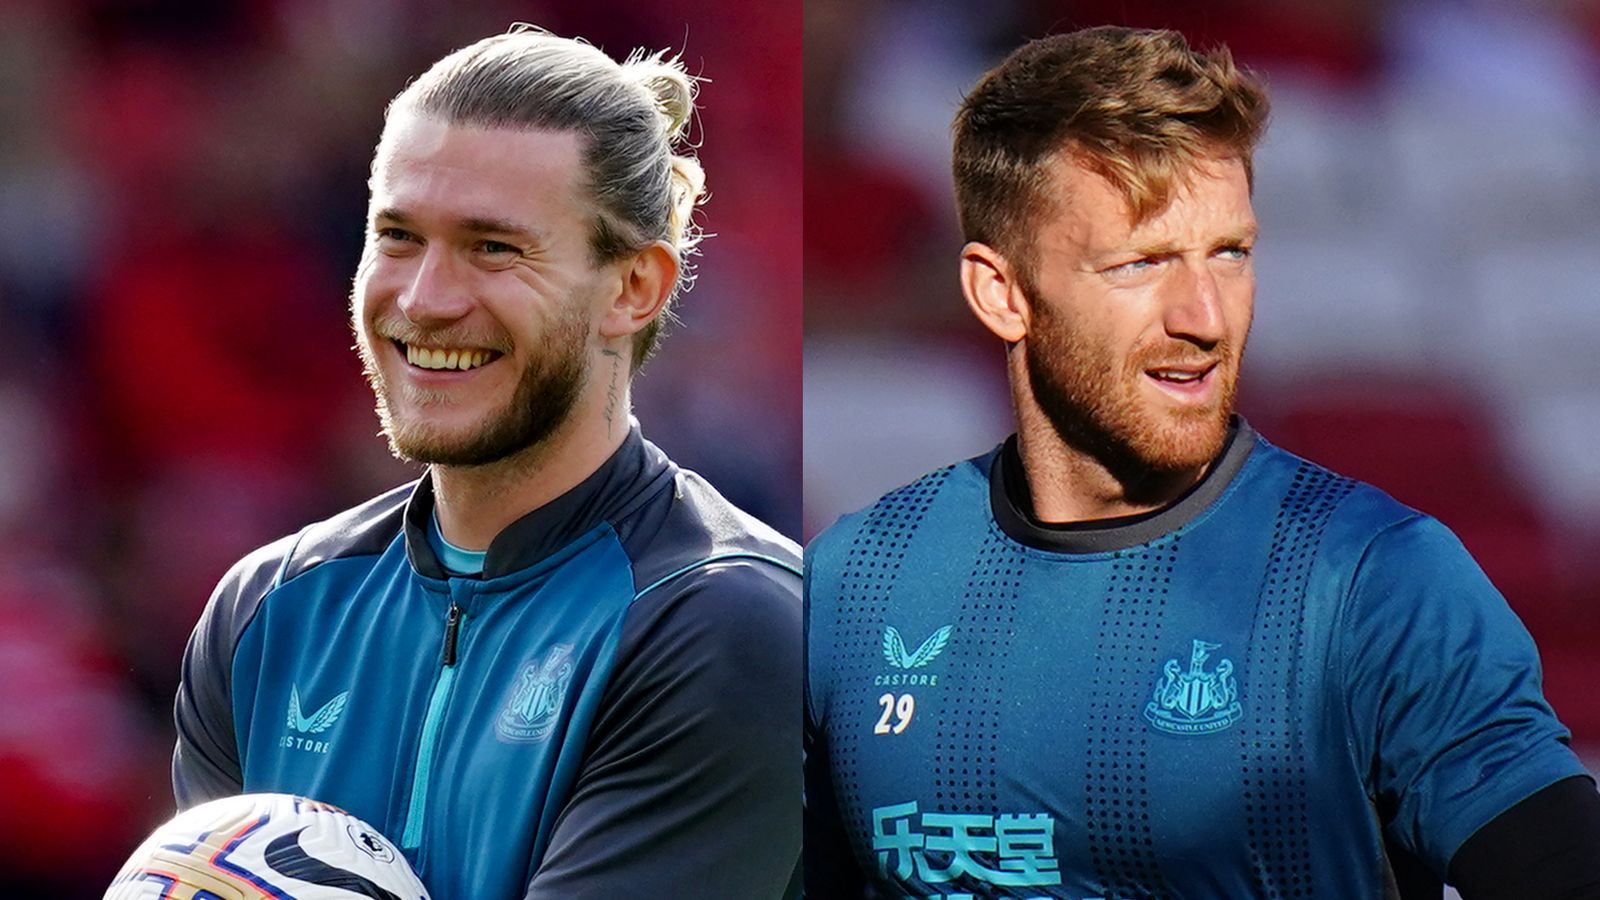 Newcastle goalkeeper crisis: Loris Karius or Mark Gillespie could start  Carabao Cup final against Manchester United | Football News | Sky Sports